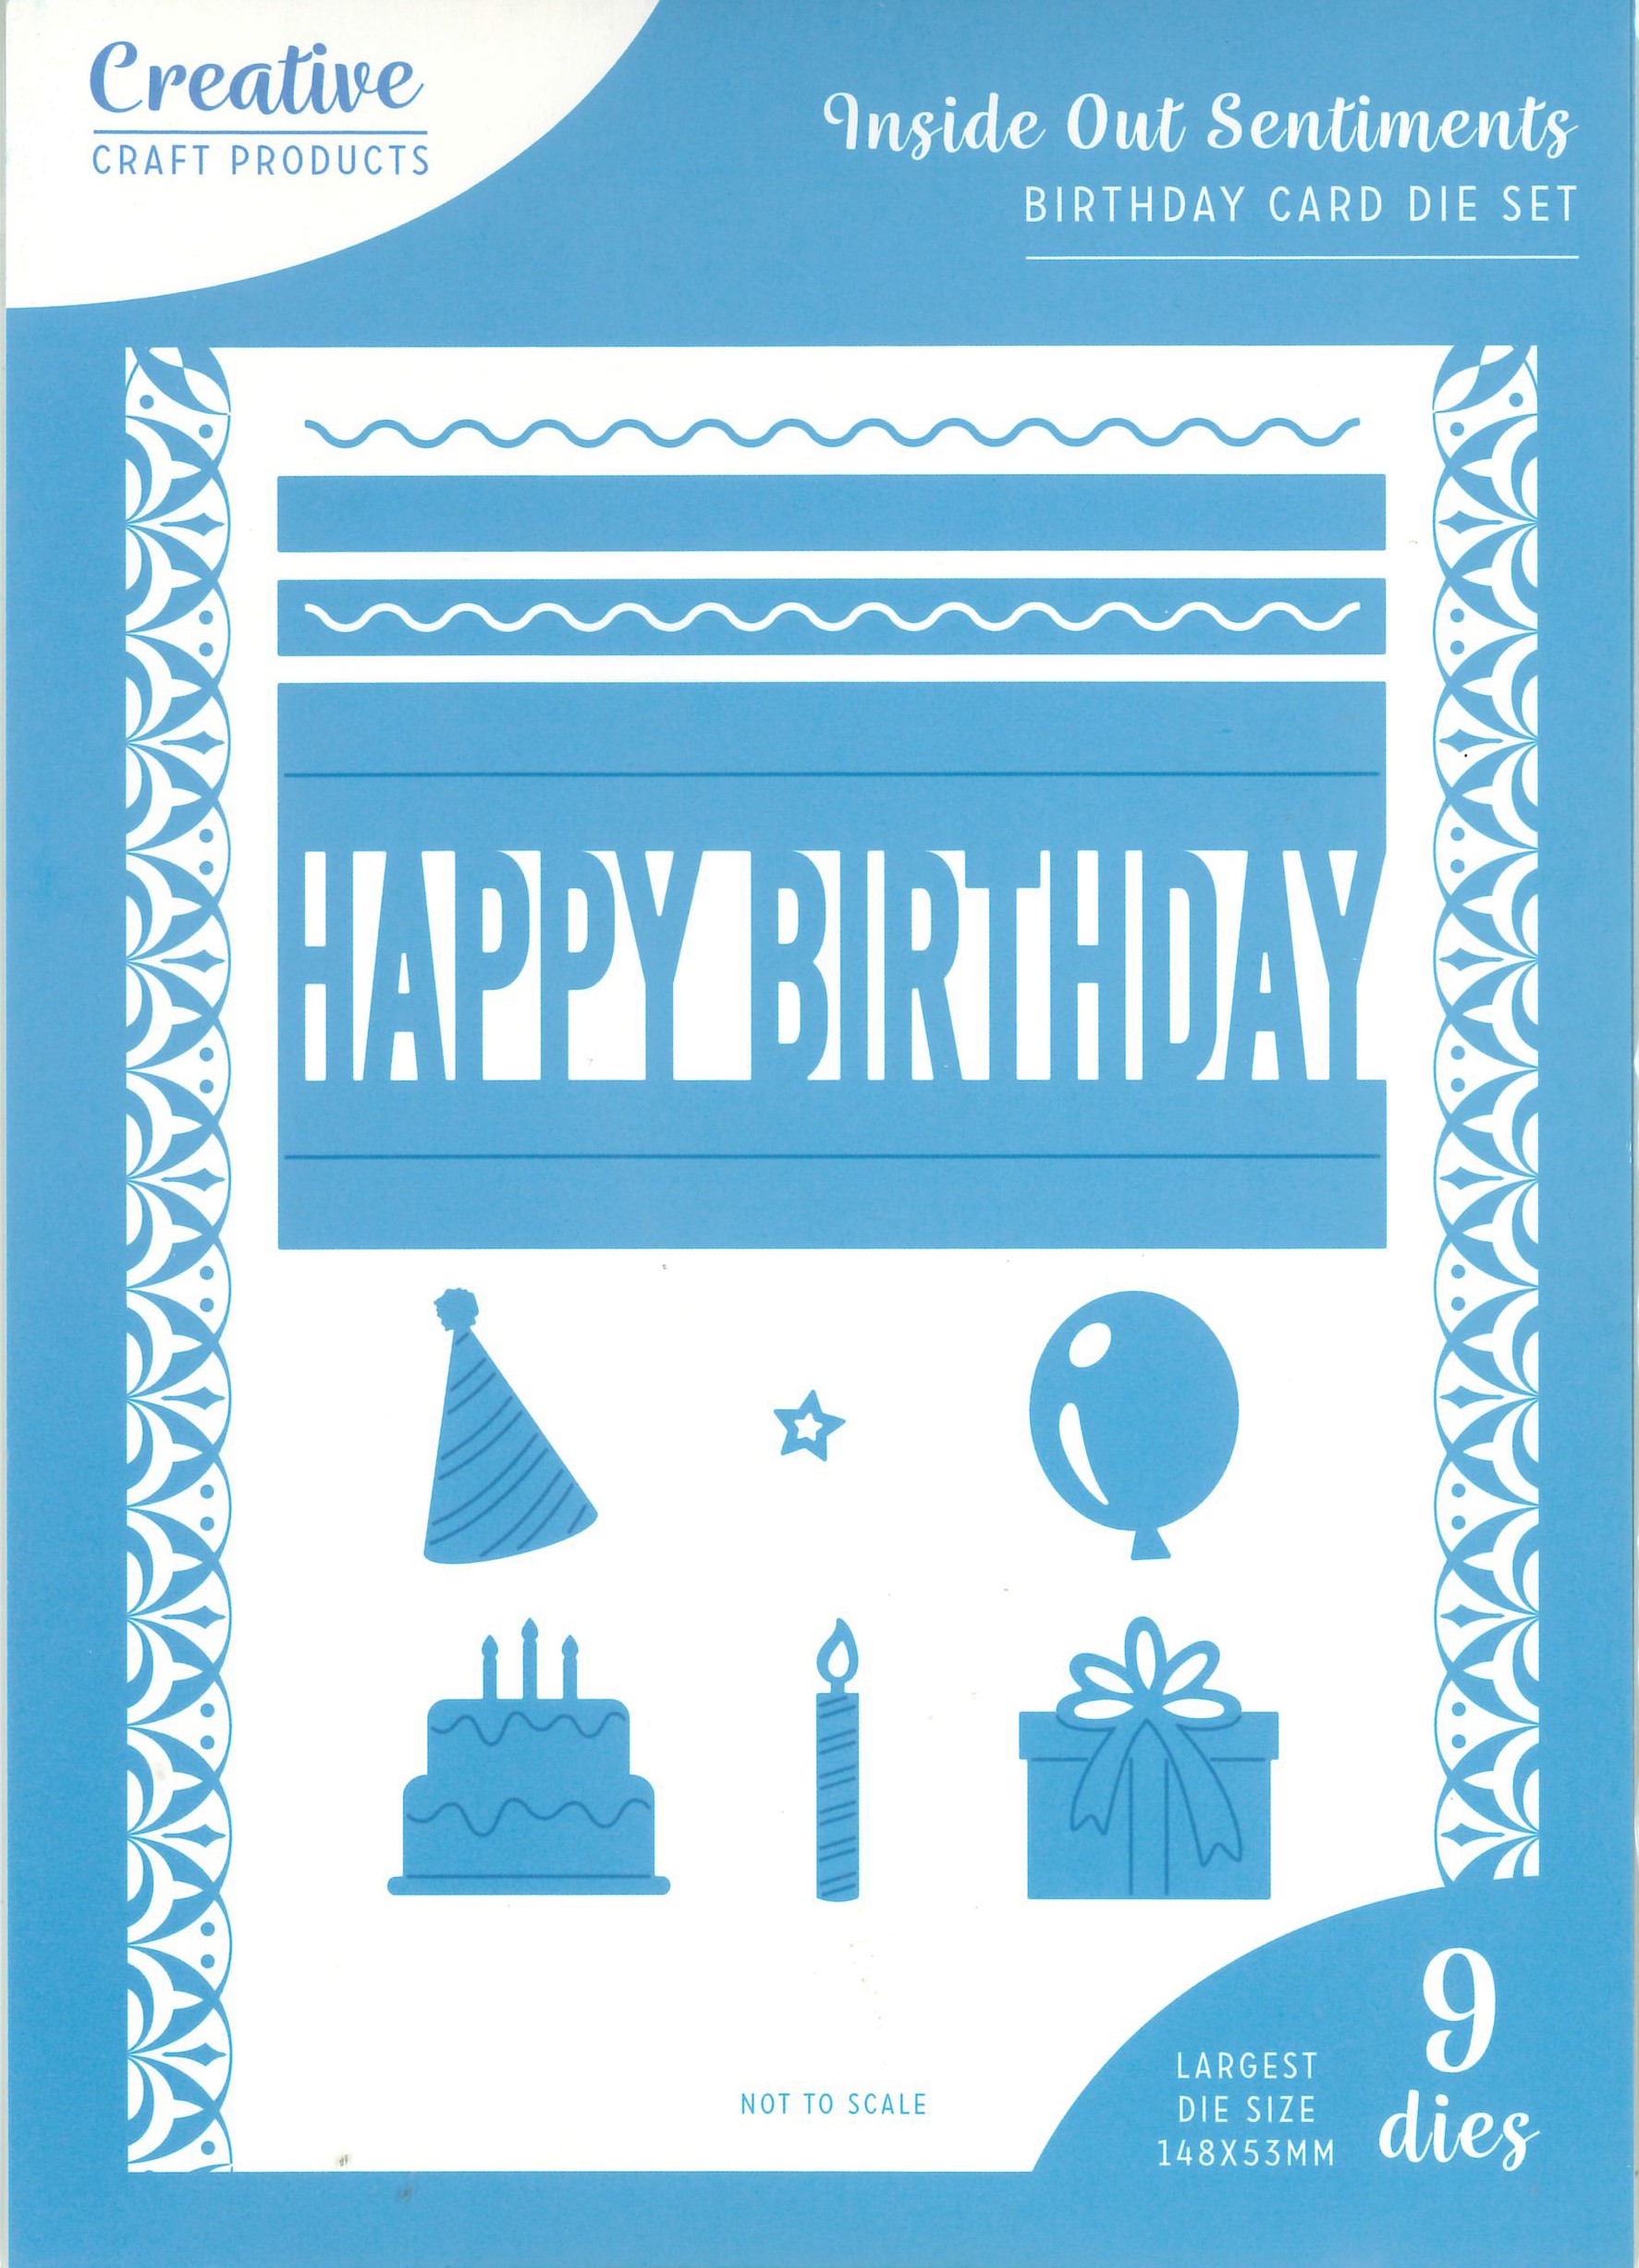 Birthday Card | Inside Out Sentiments Dies